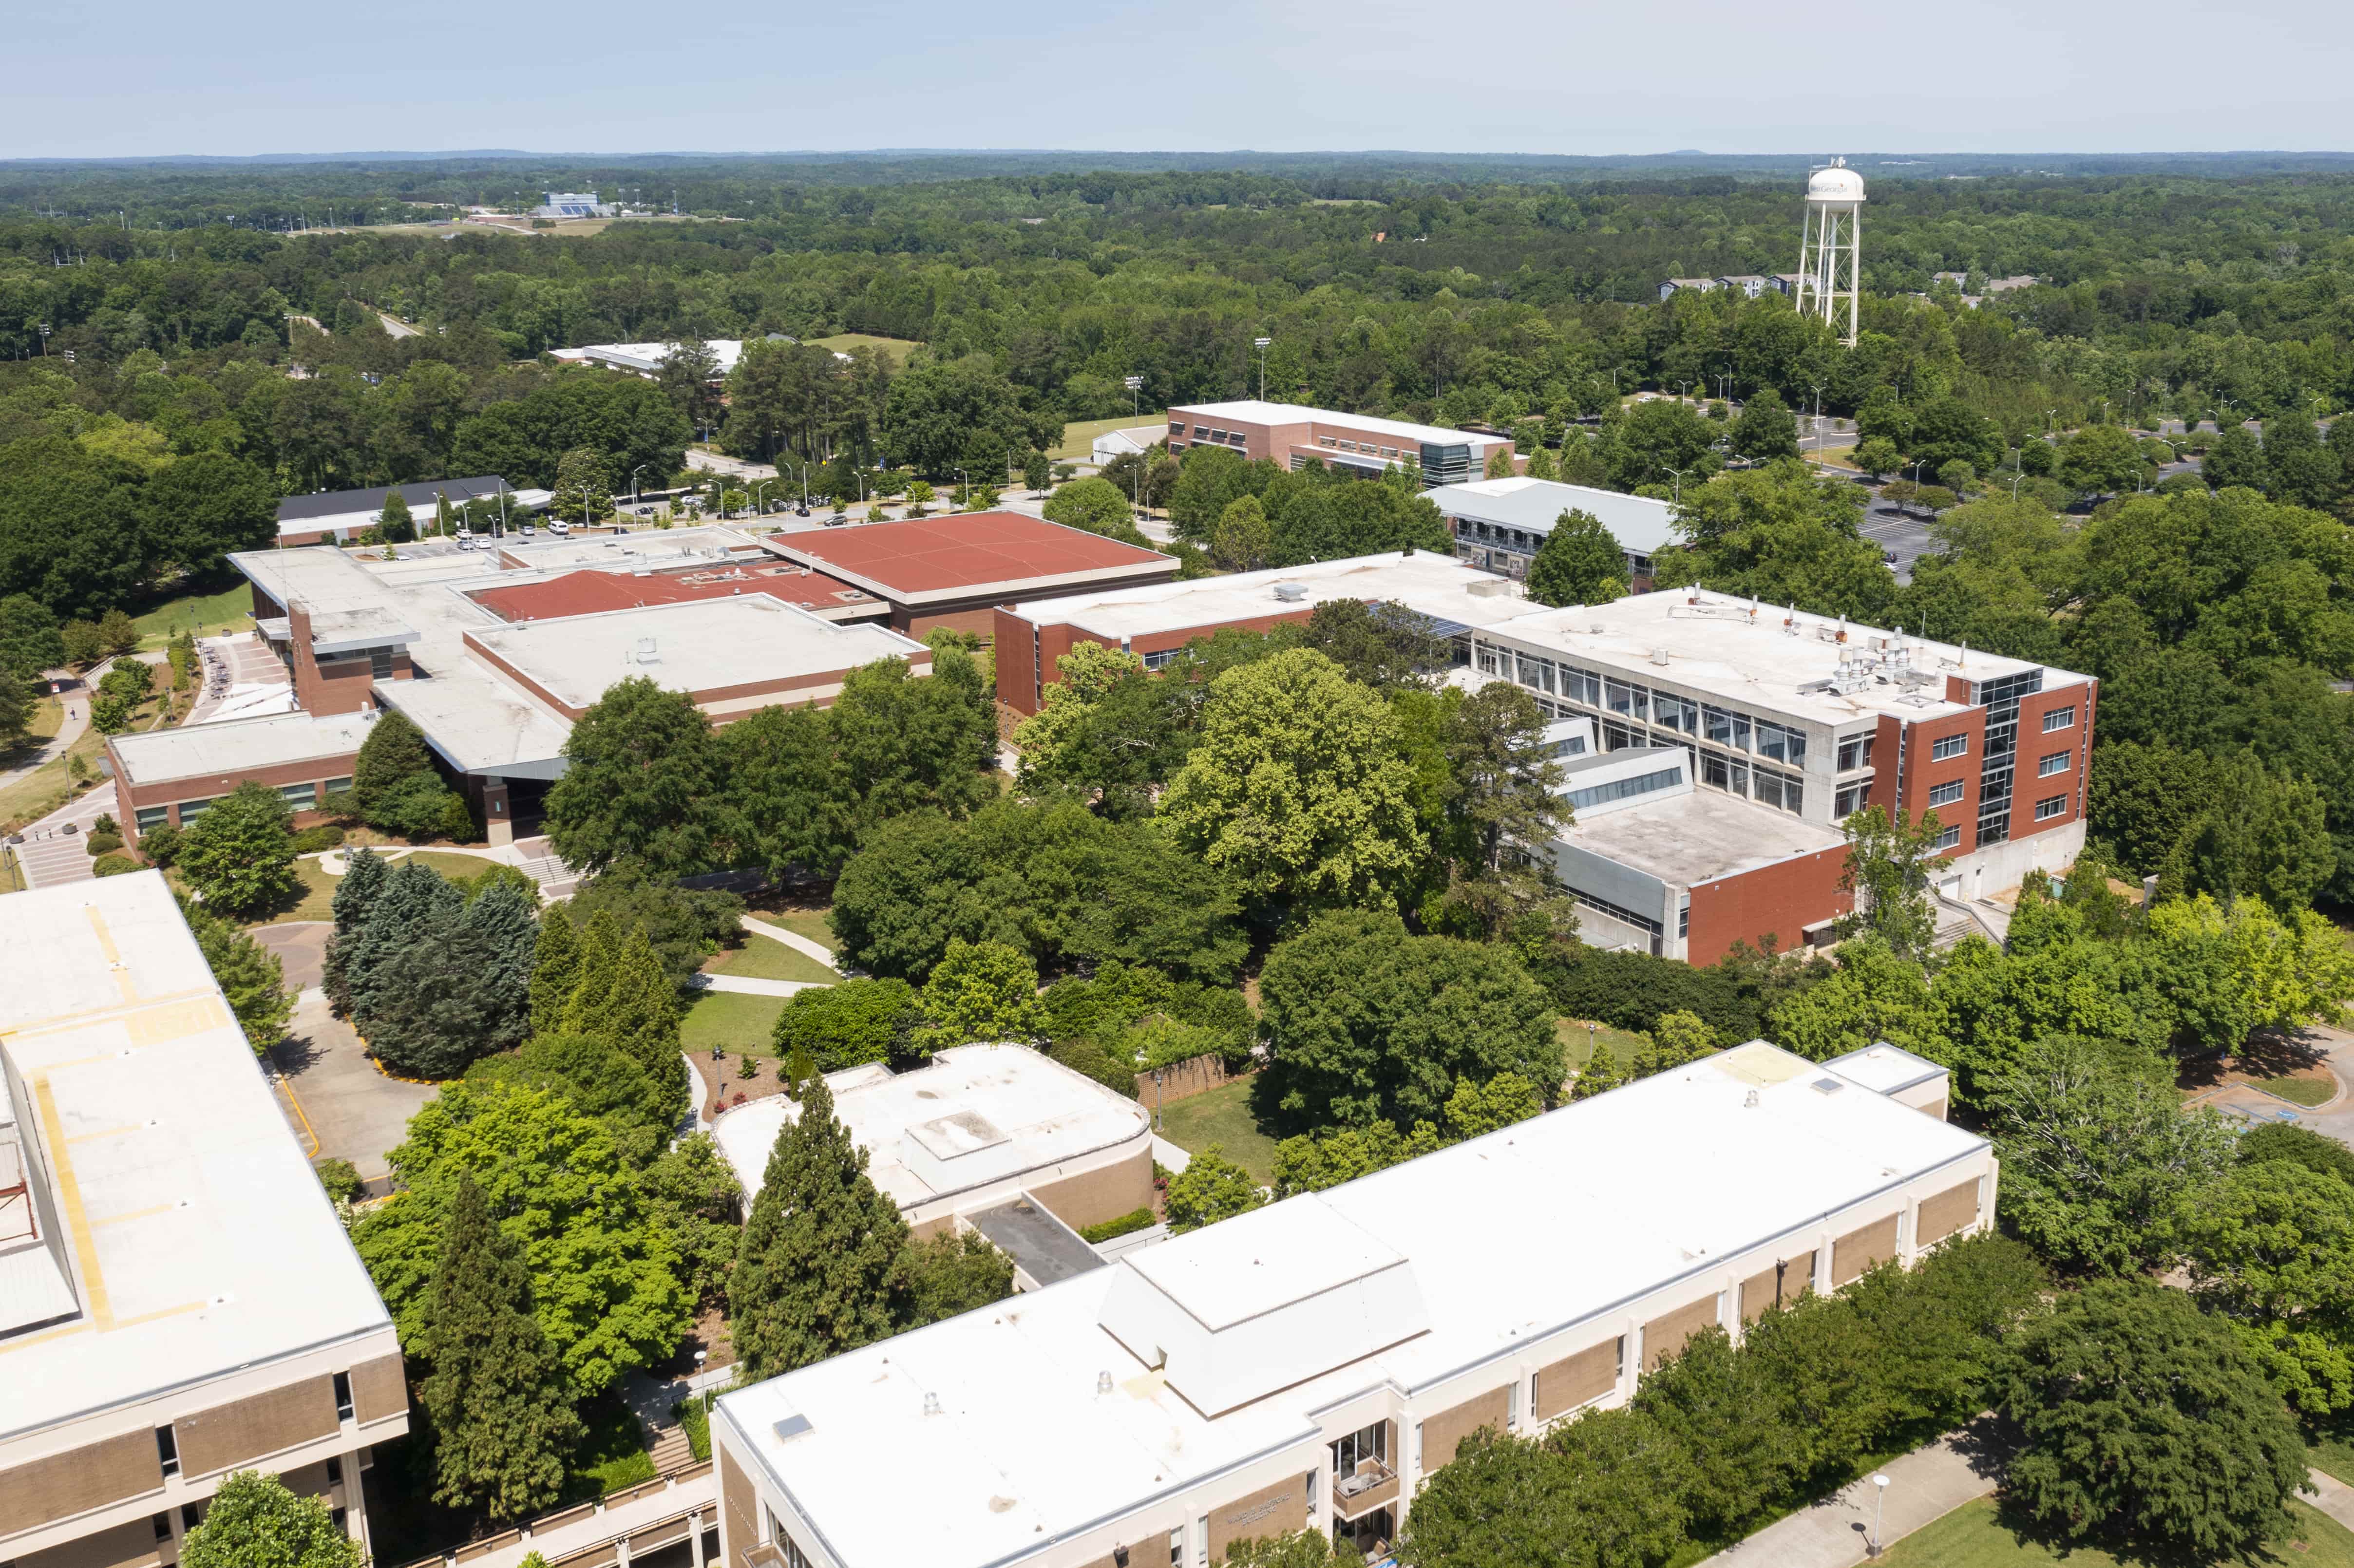 Aerial photo of campus taken by a drone.